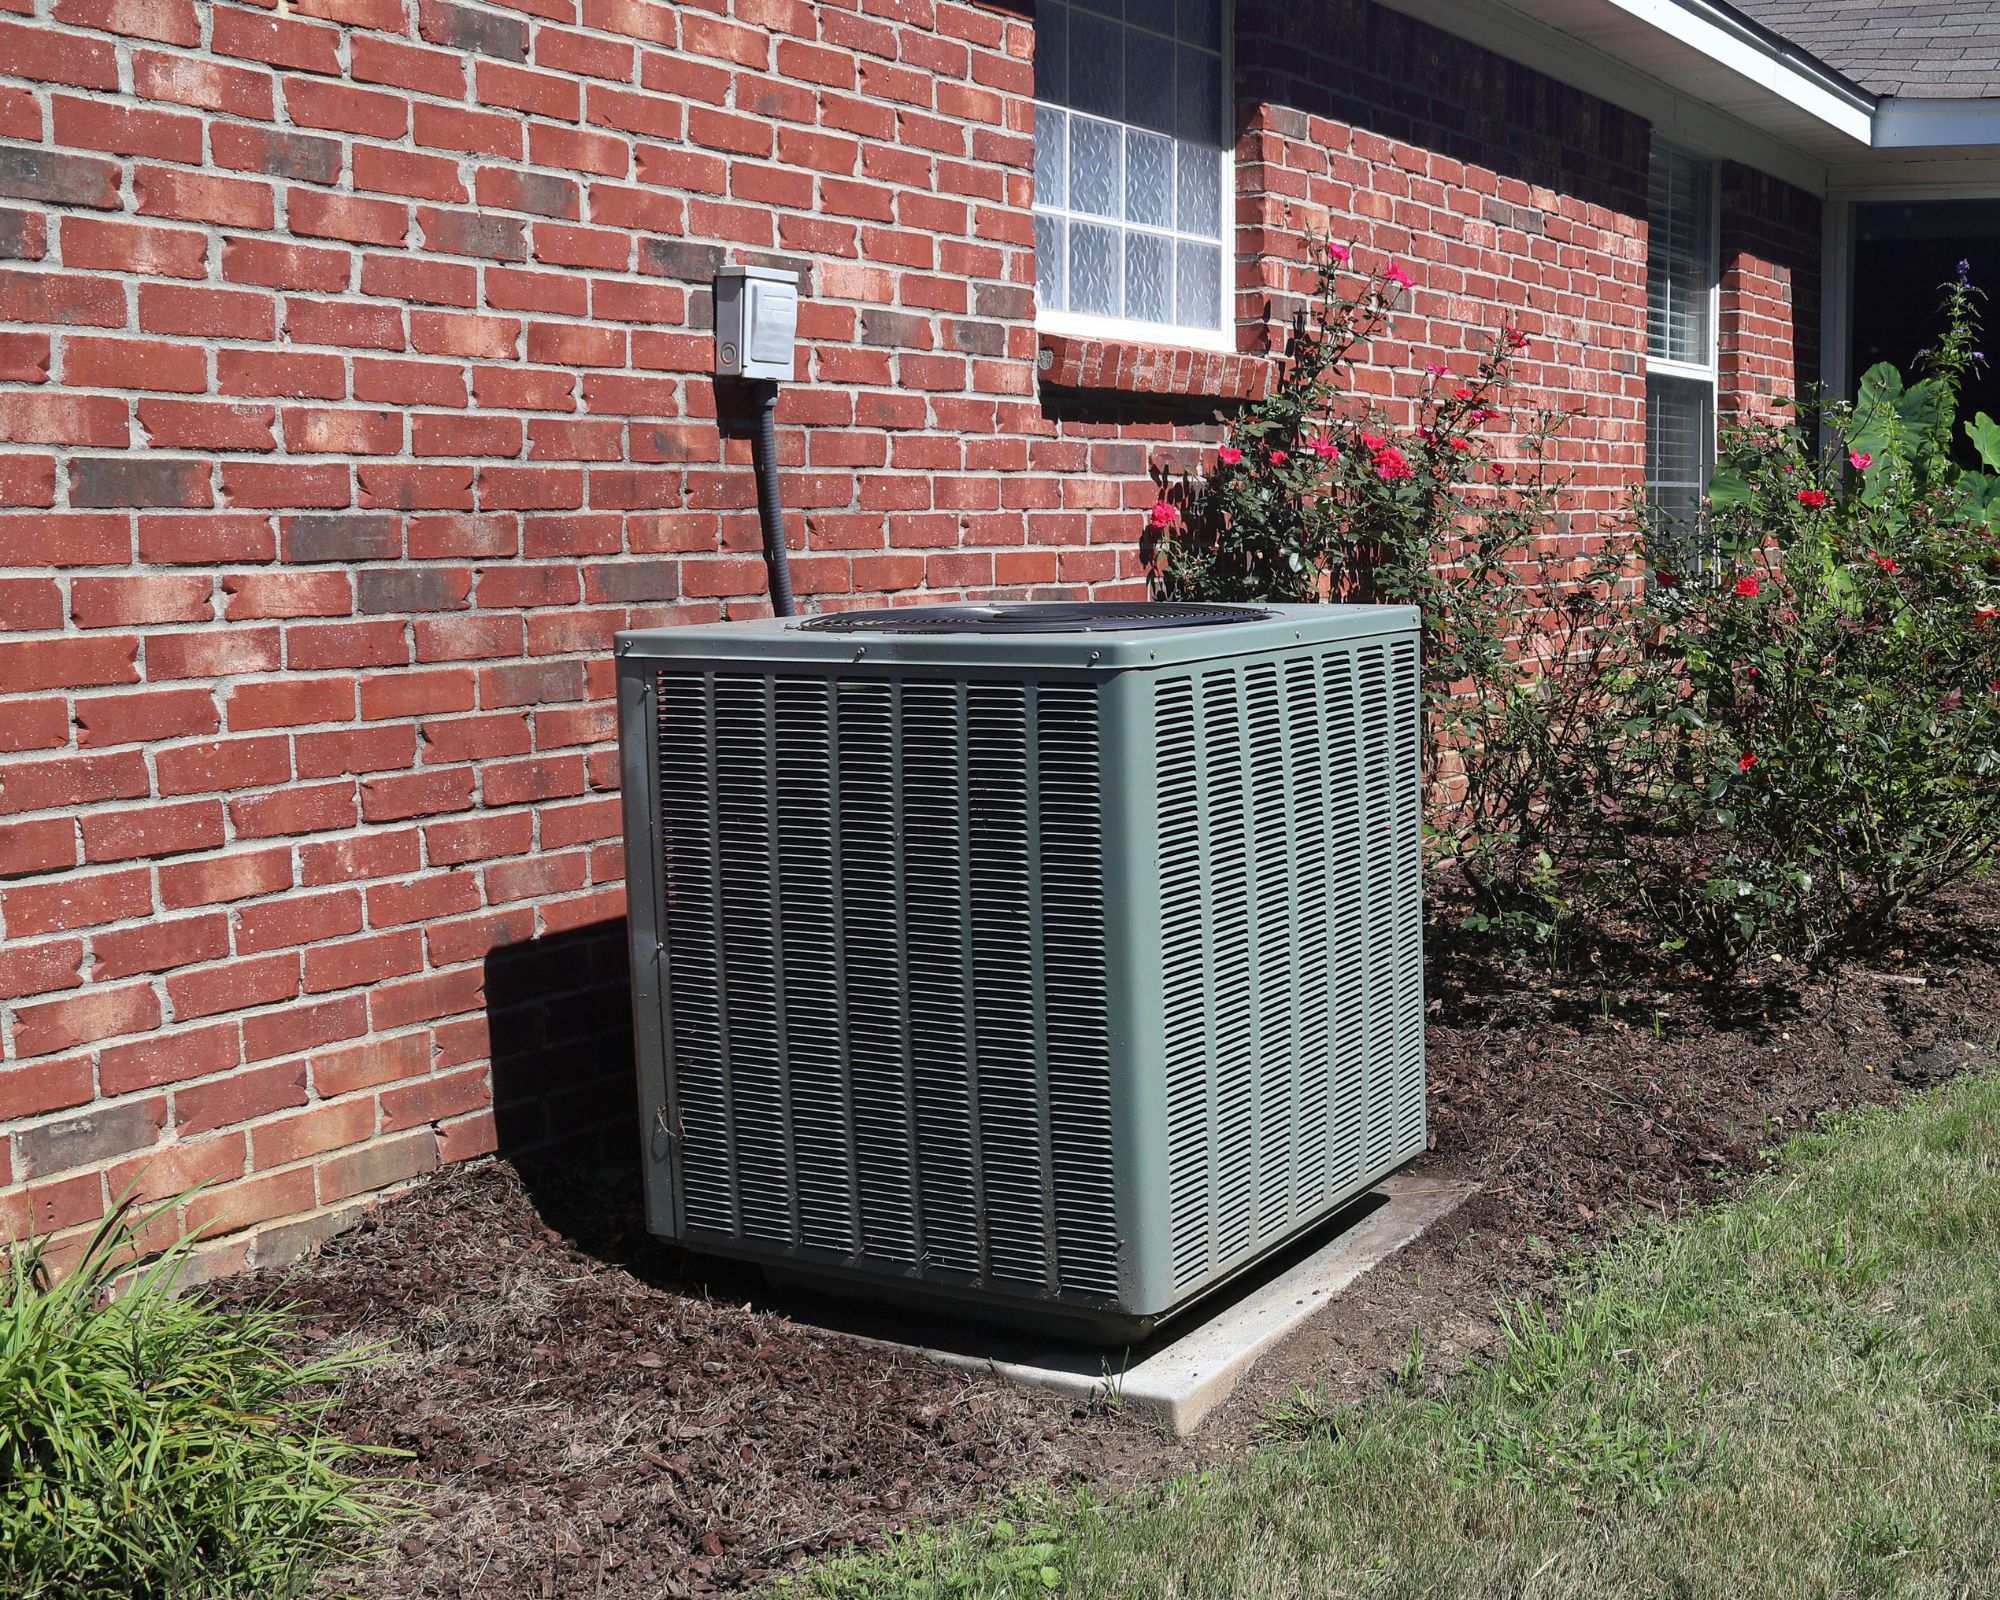 HVAC system sitting outside of home